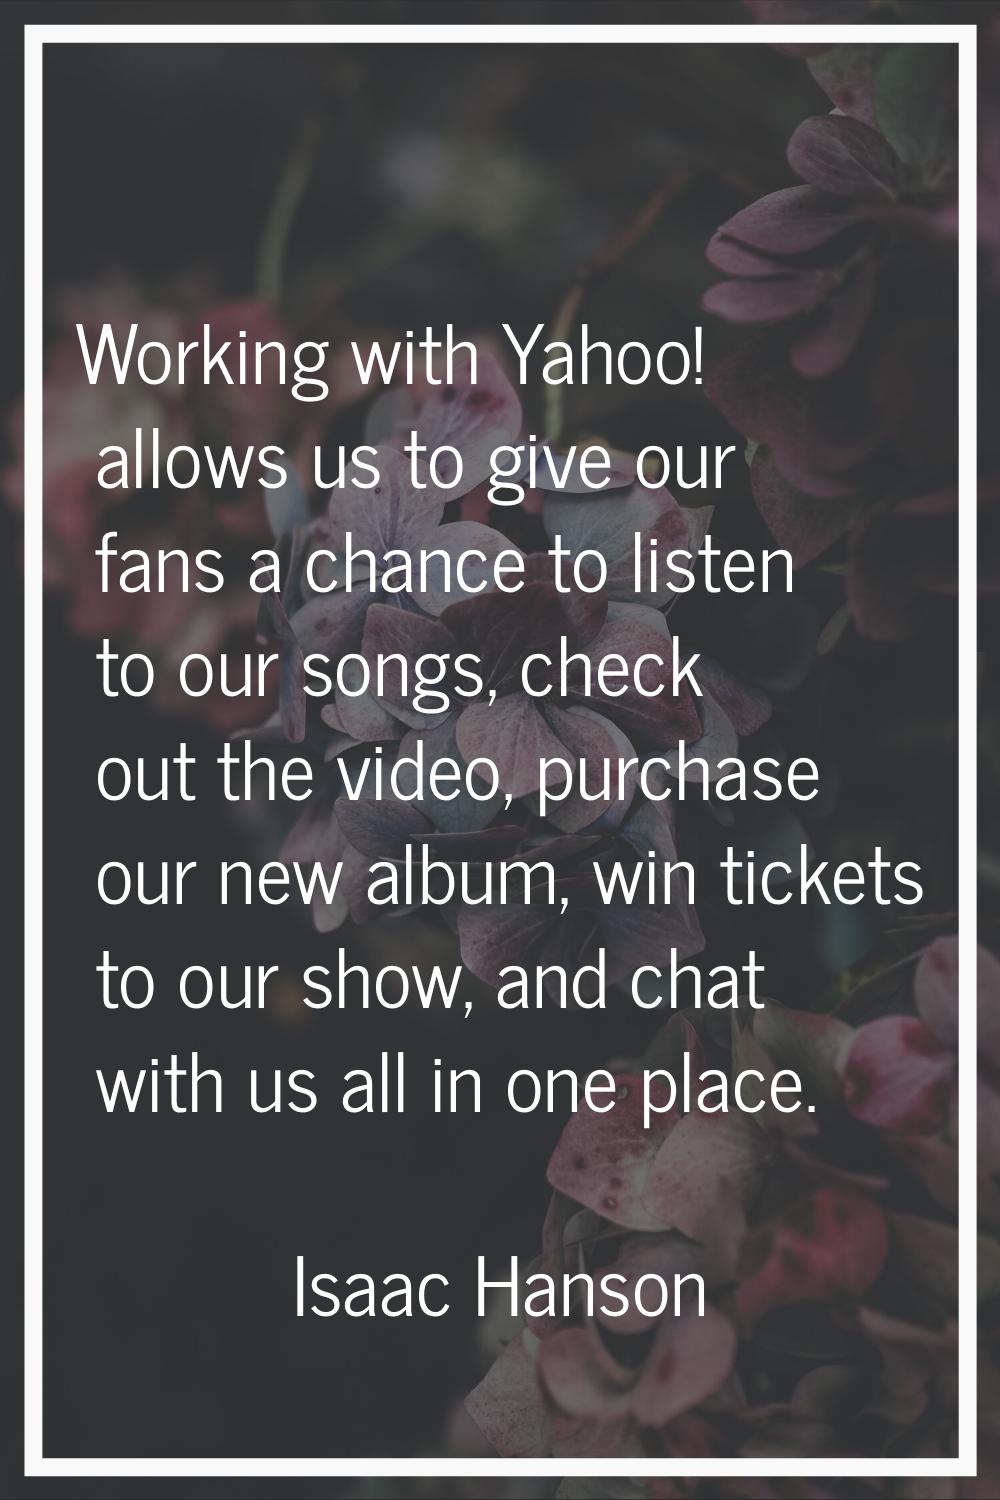 Working with Yahoo! allows us to give our fans a chance to listen to our songs, check out the video